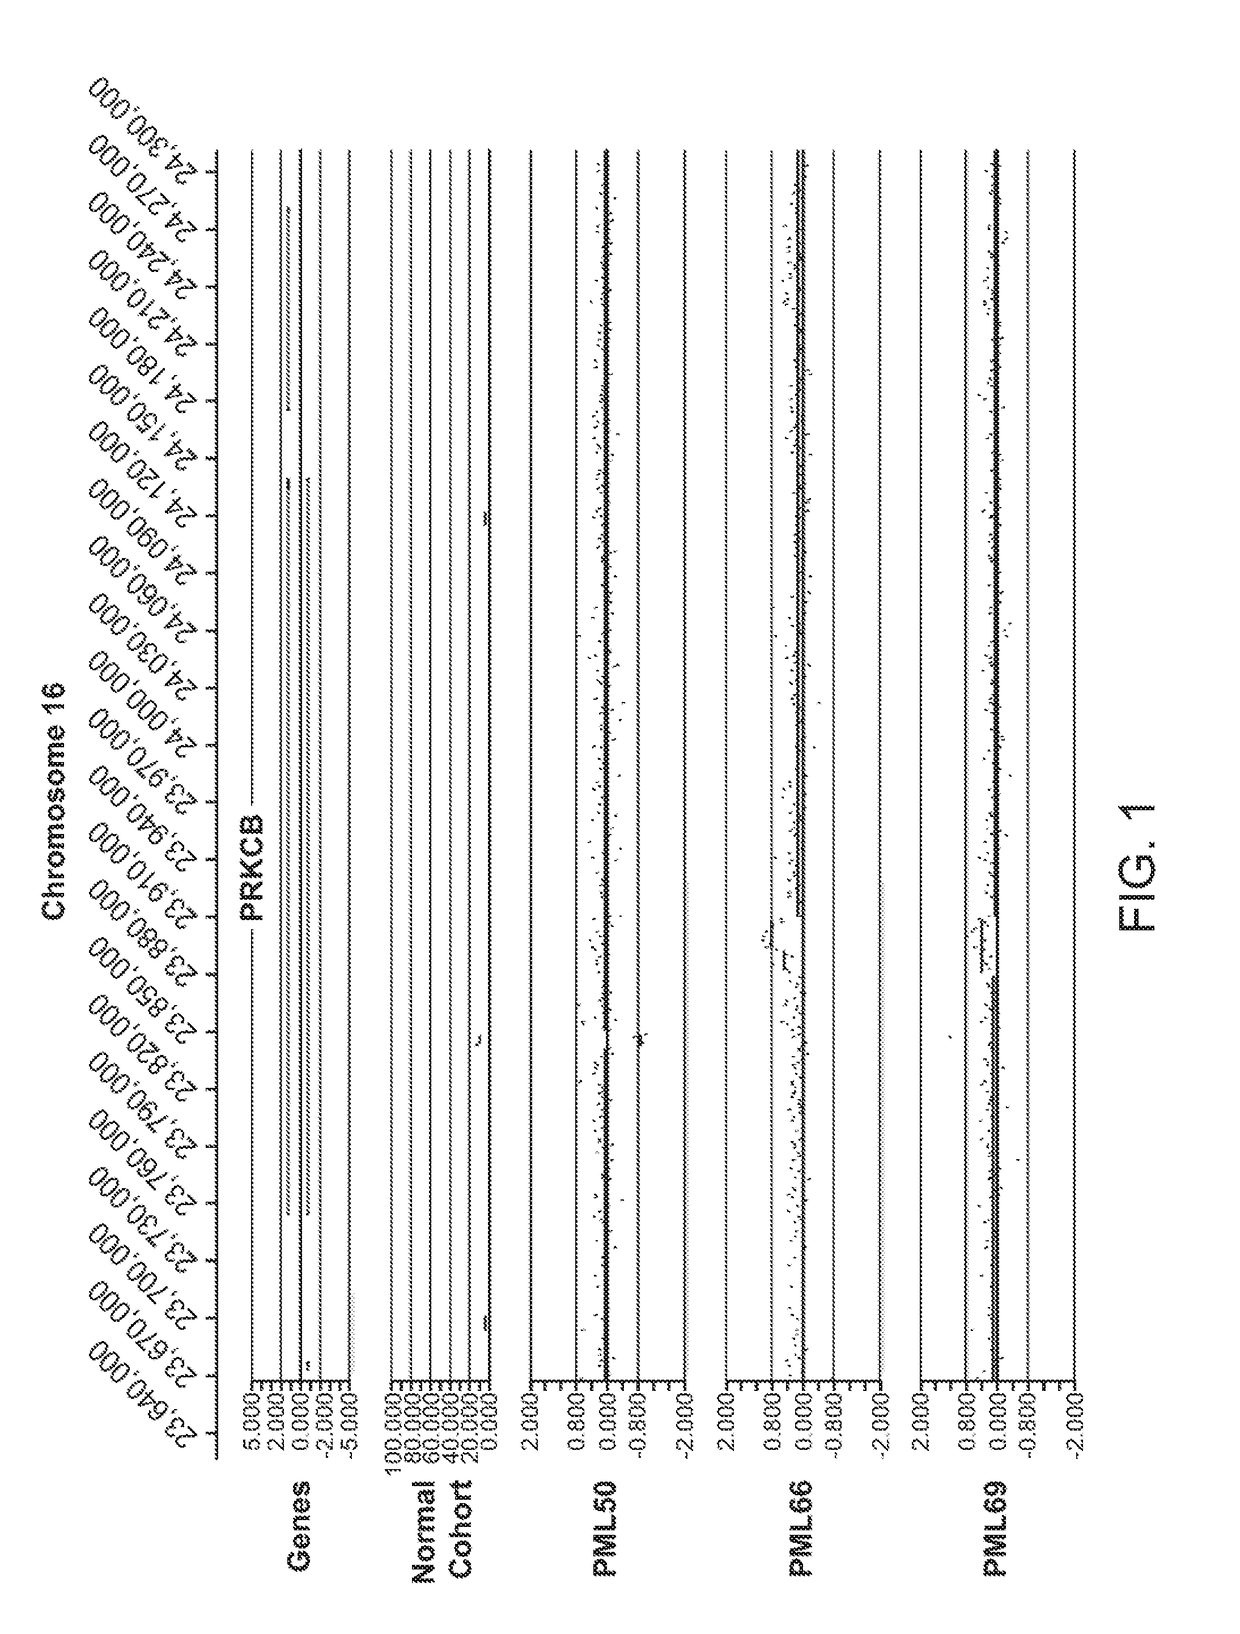 Methods for assessing risk of developing a viral disease using a genetic test